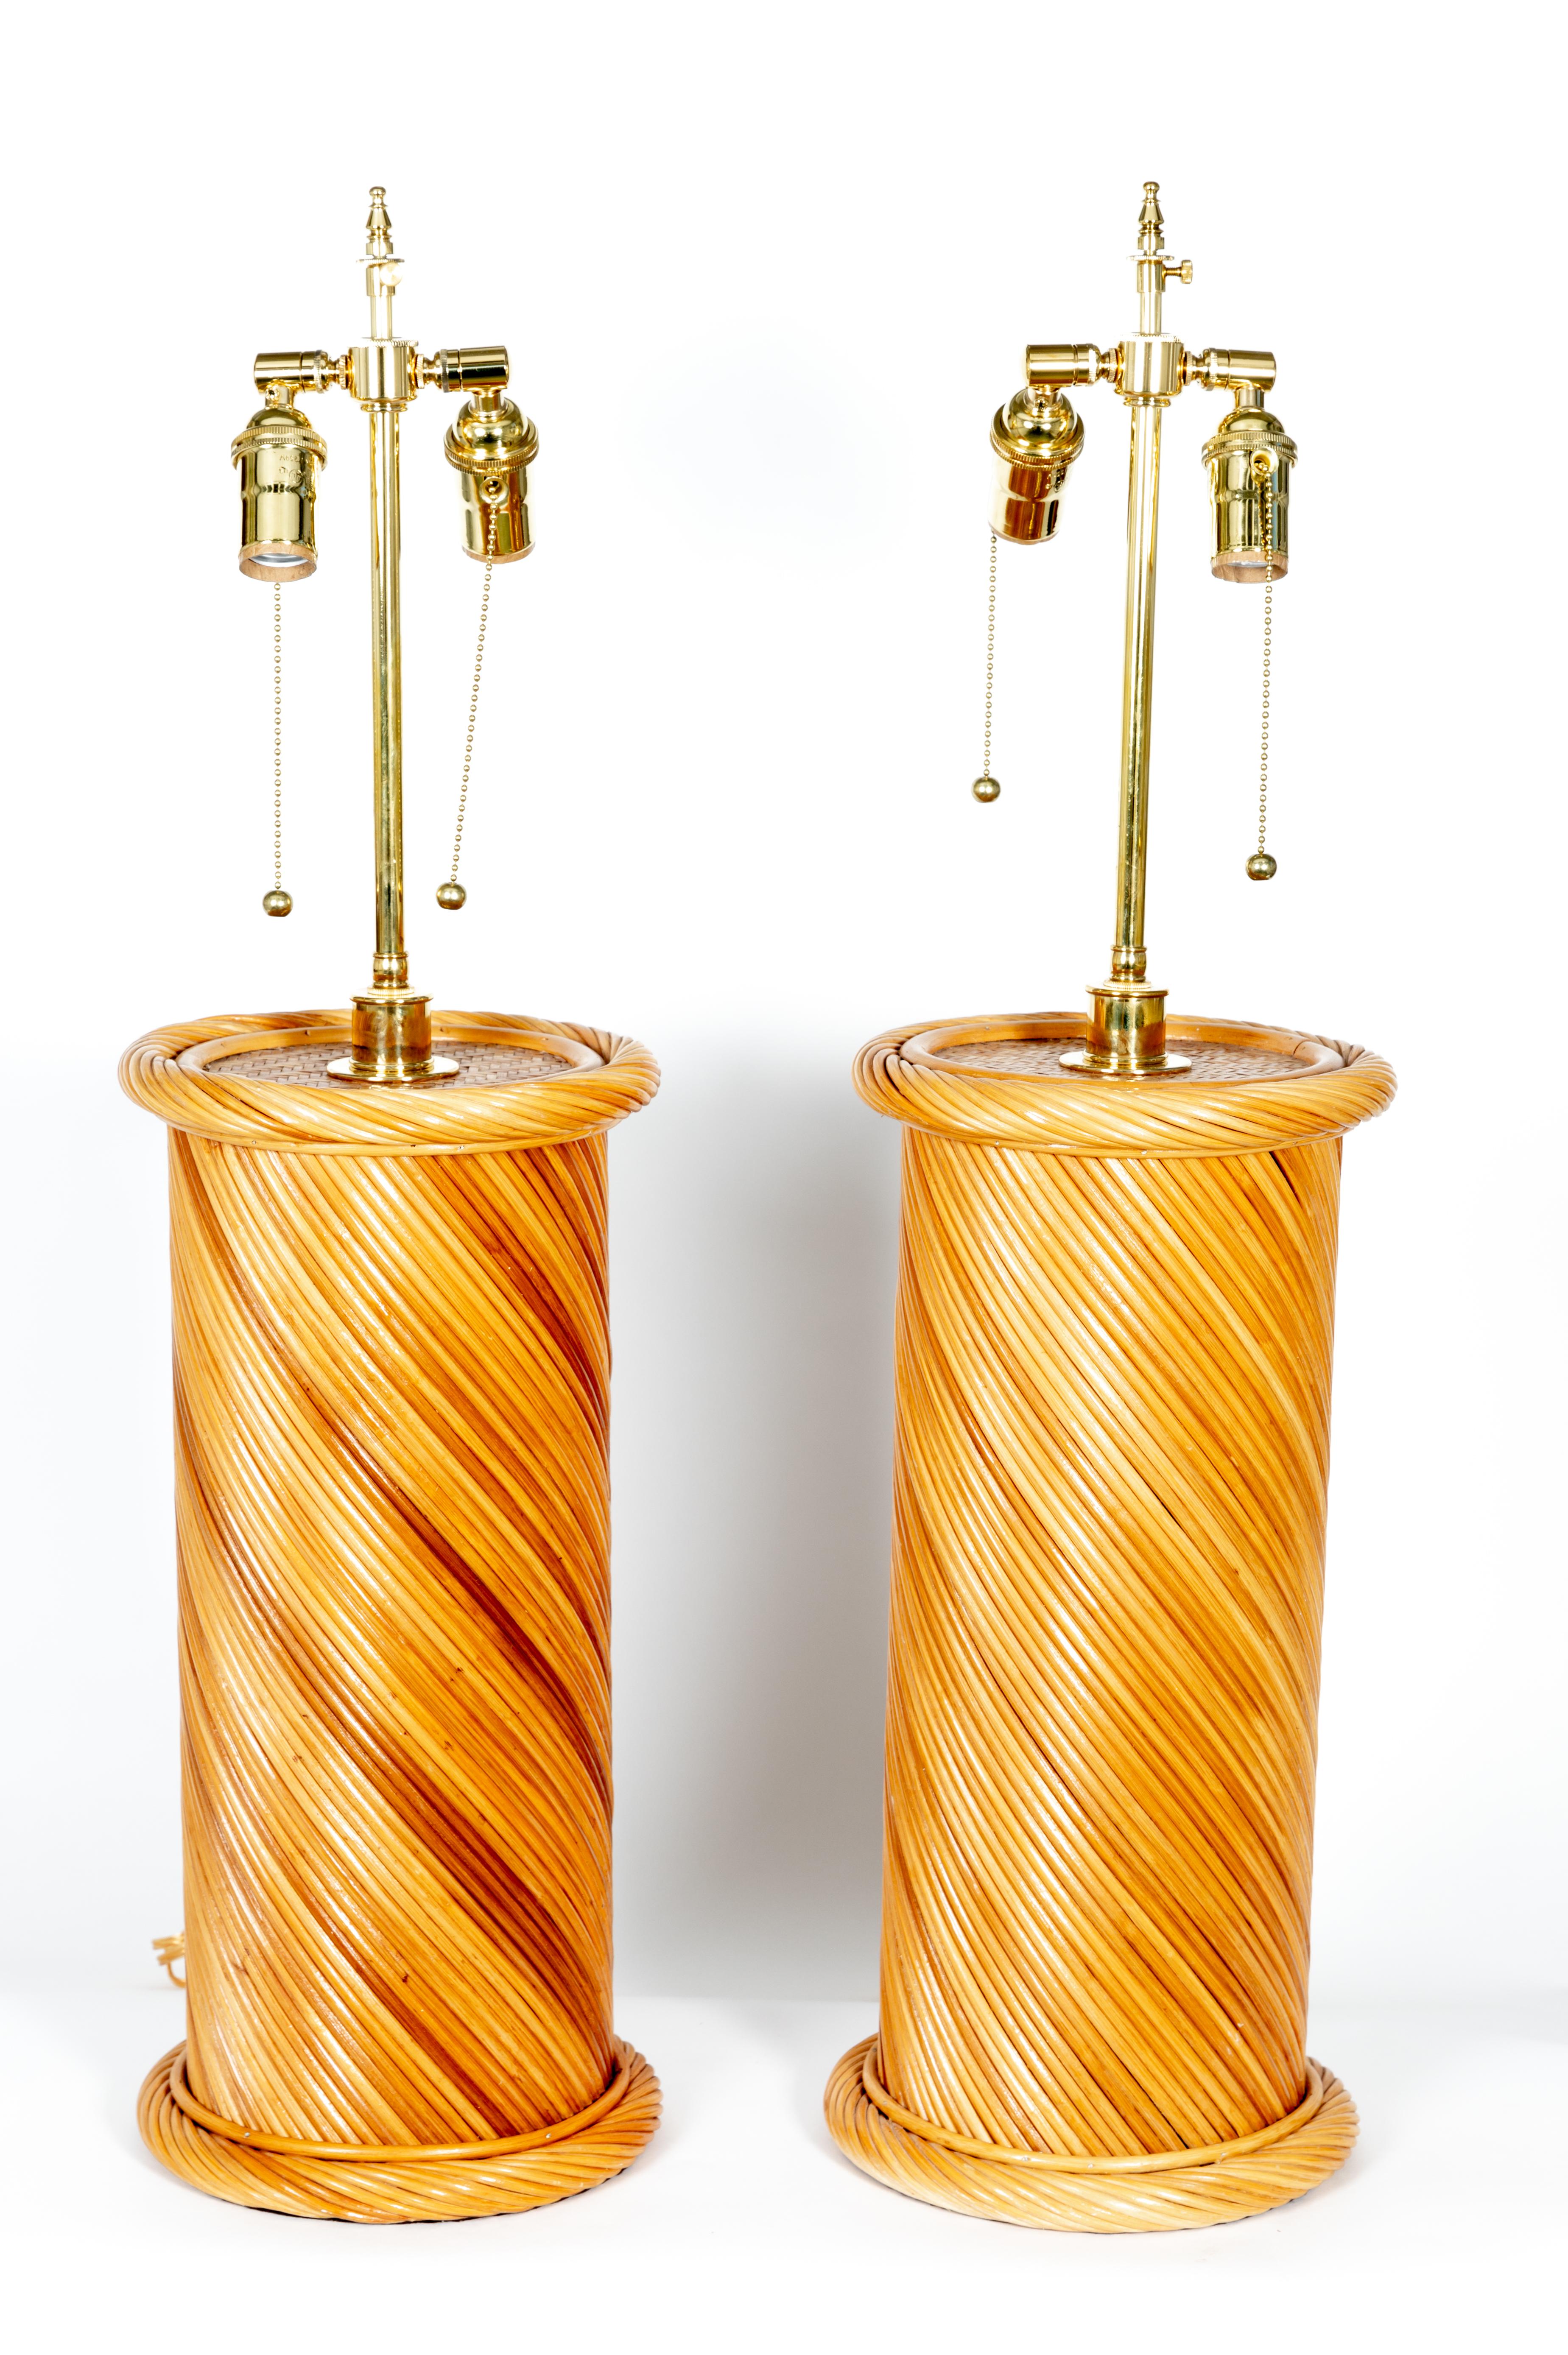 Hand-Woven Pair of Rattan Woven Table Lamps with Brass Detail